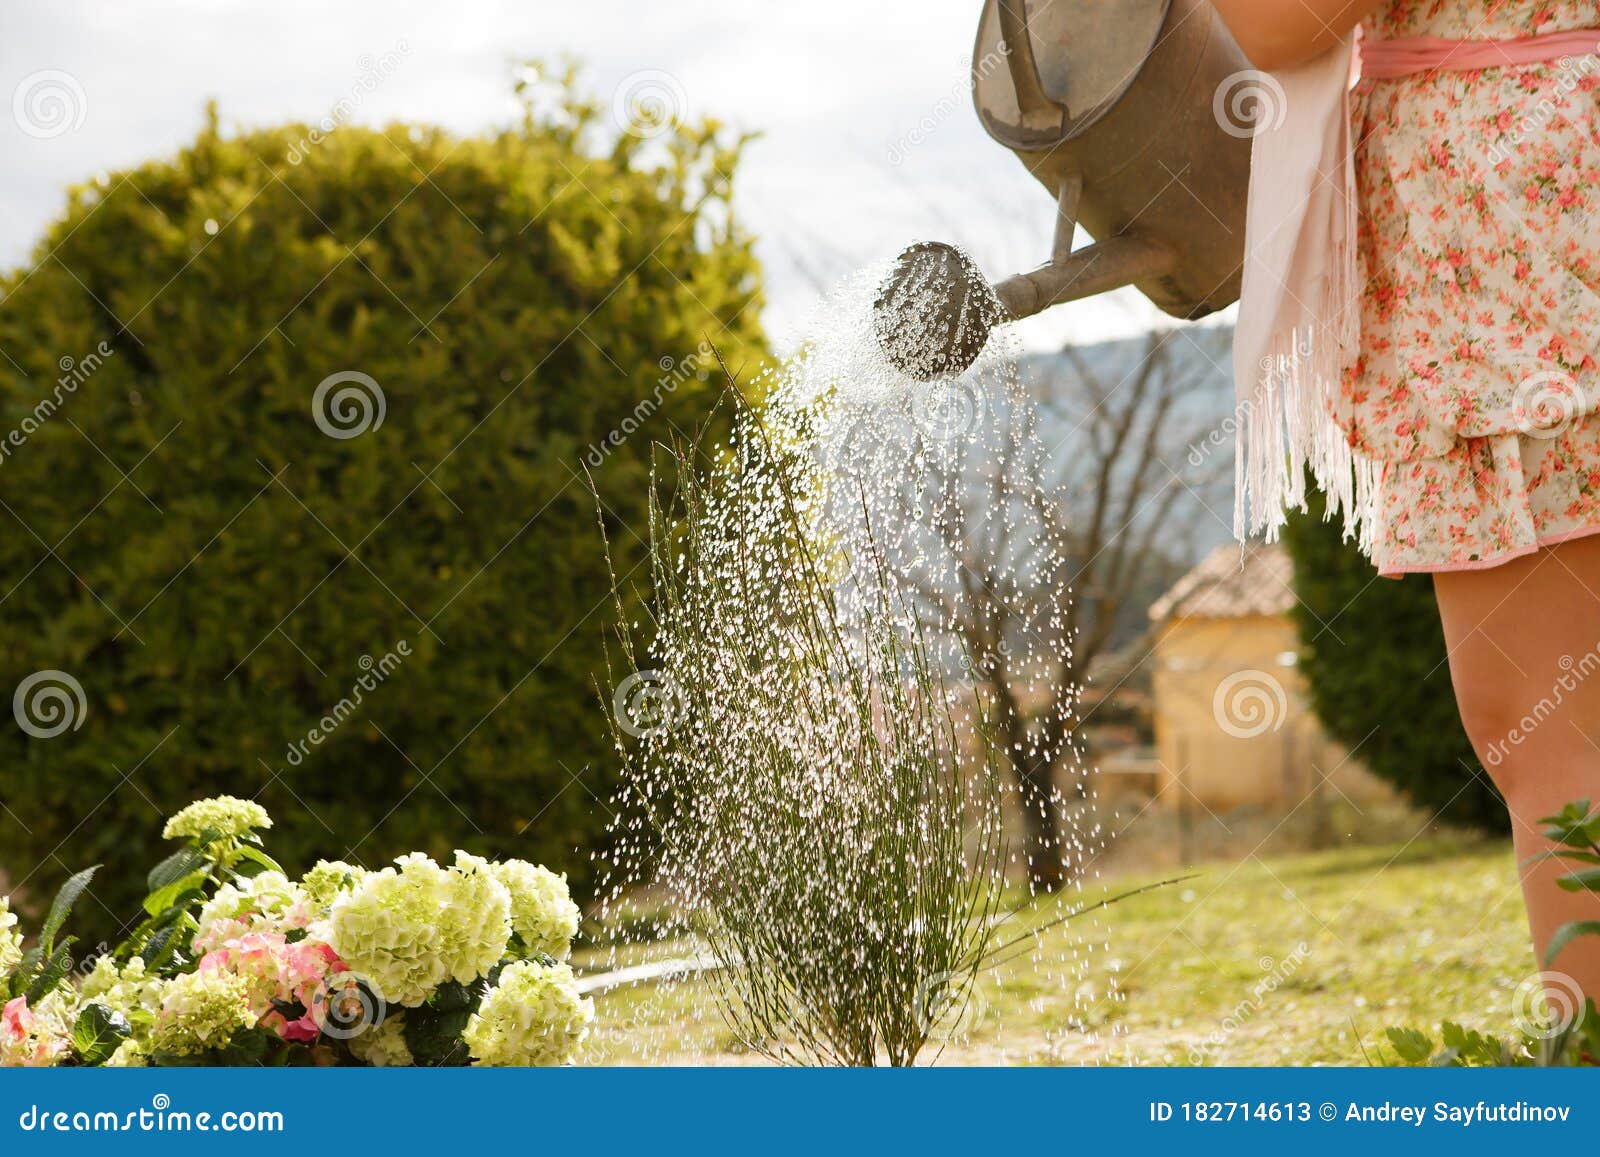 watering can for watering flowers in hands of girl